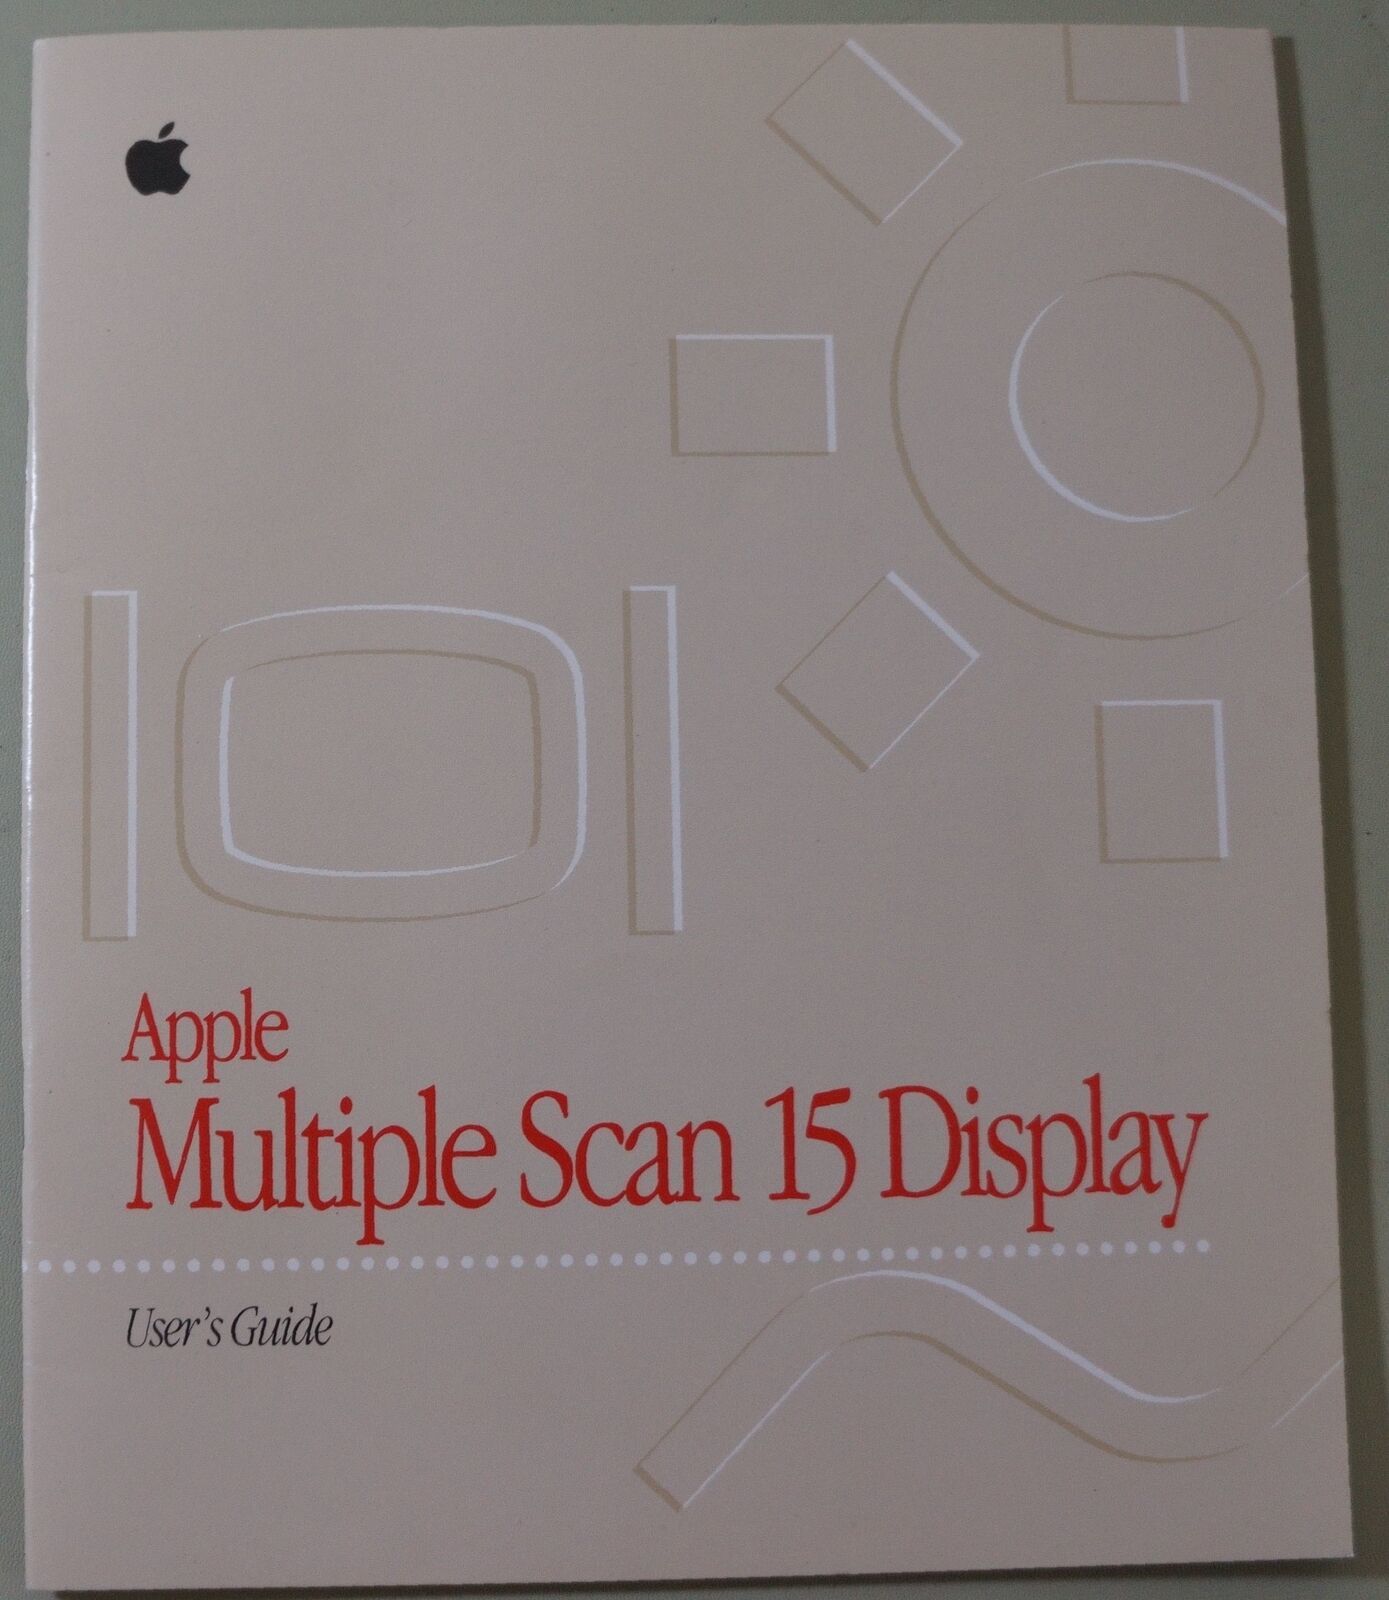 Primary image for Apple Multiple Scan 15 Display - User's Guide 